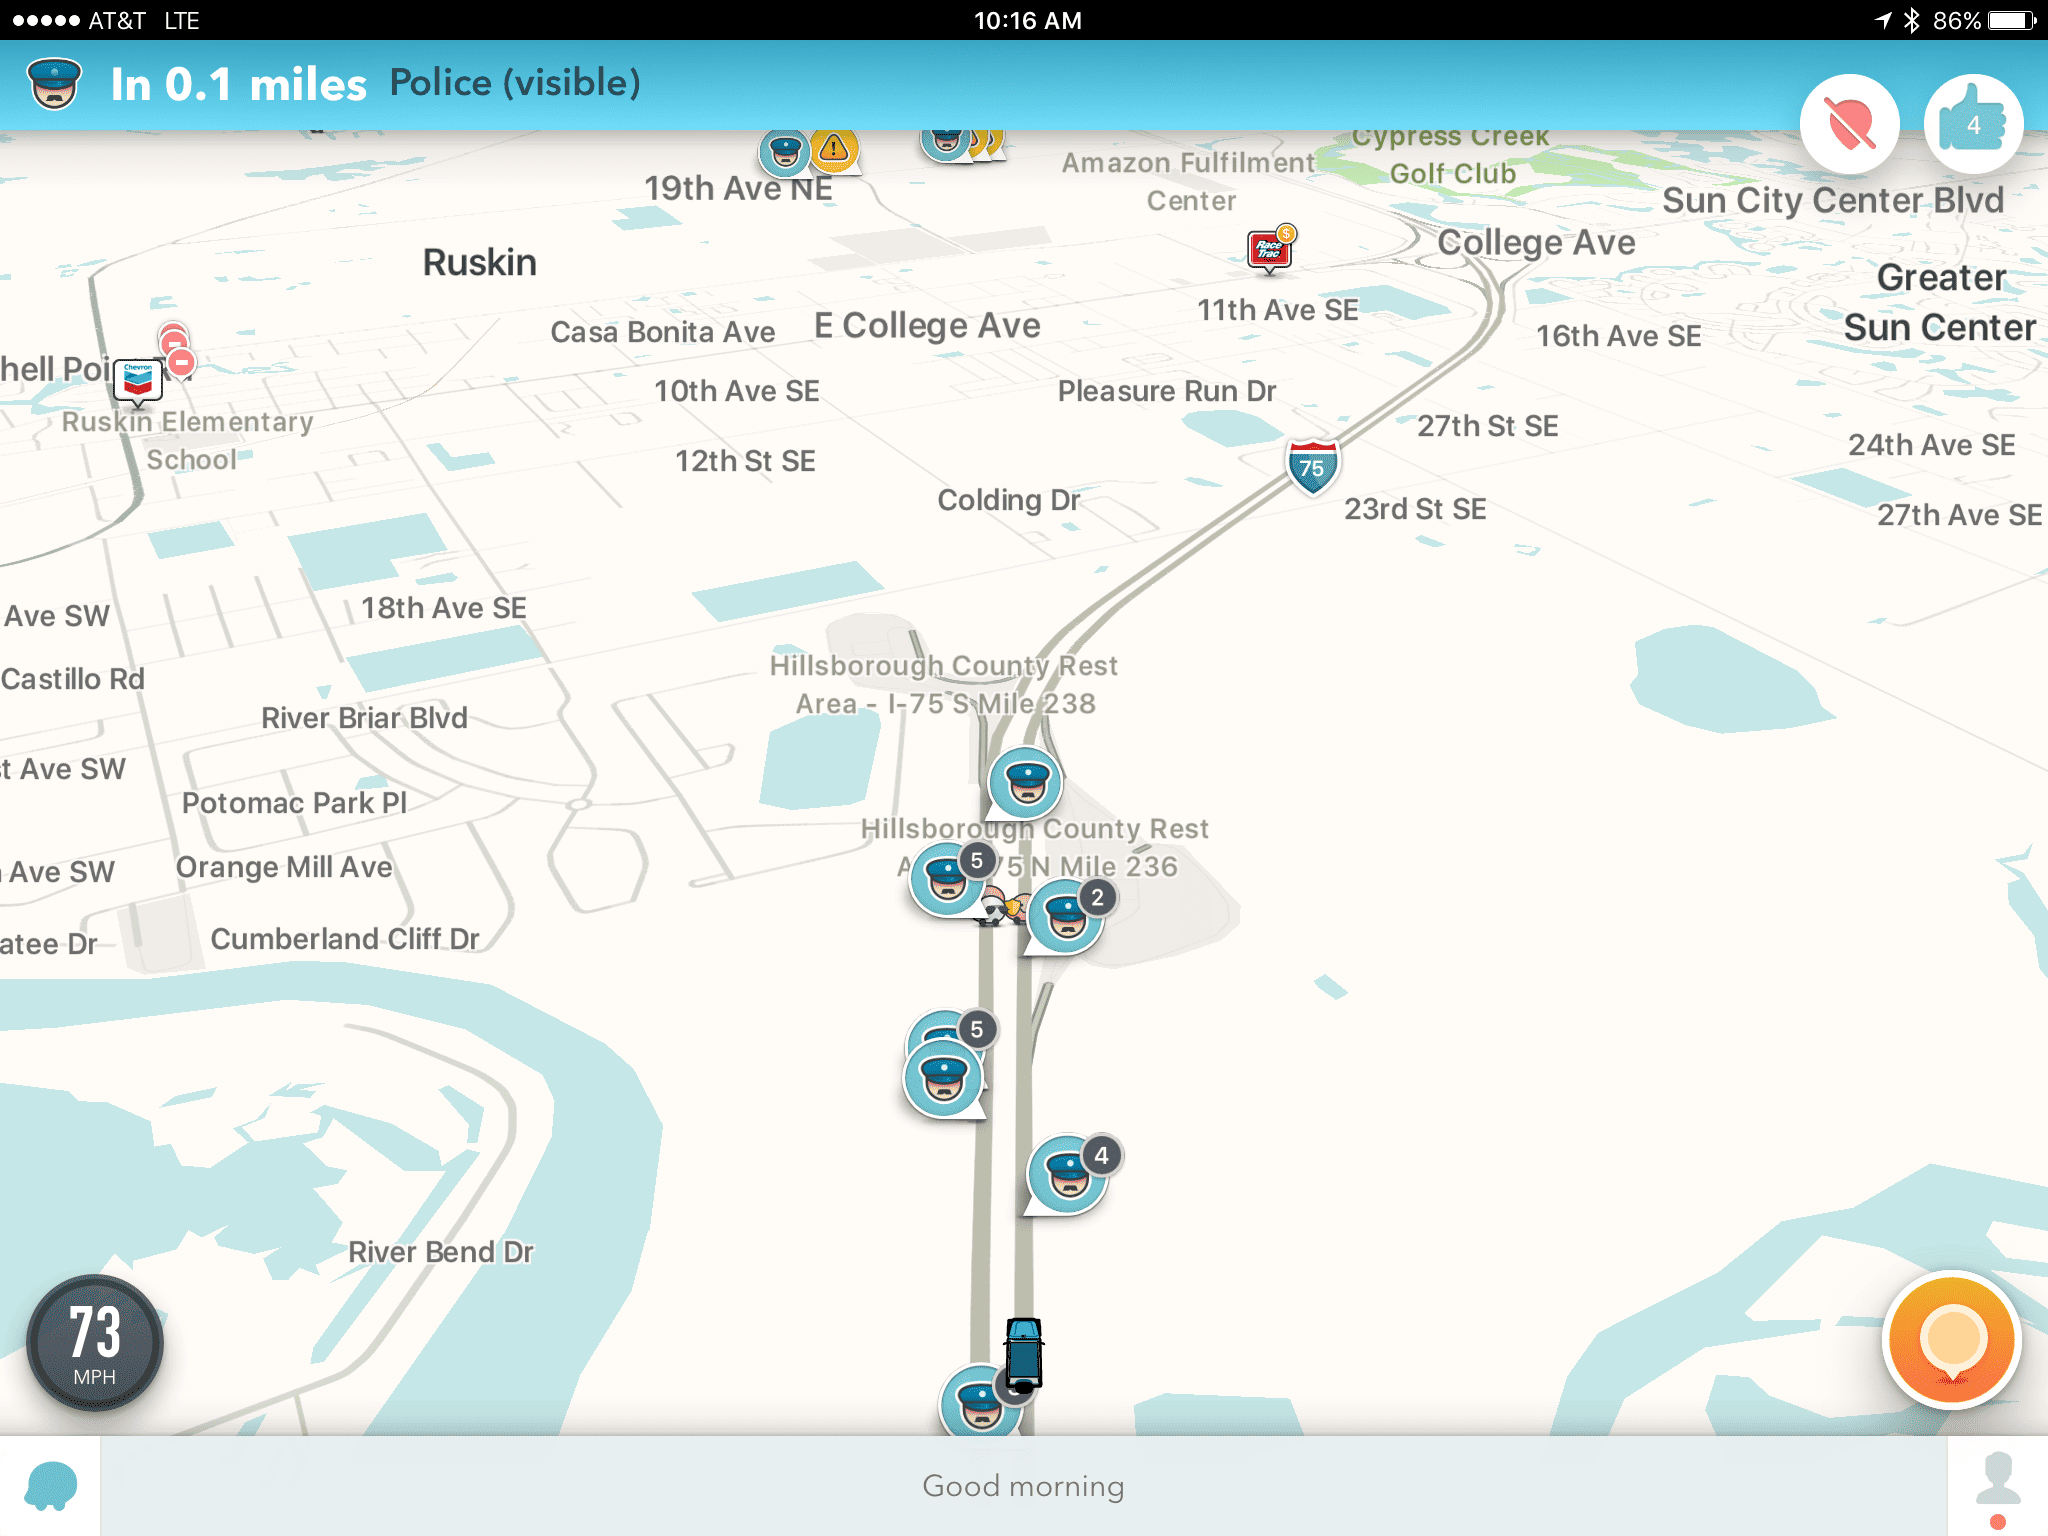 A screen shot of the FHP Aerial Unit locations on I-75